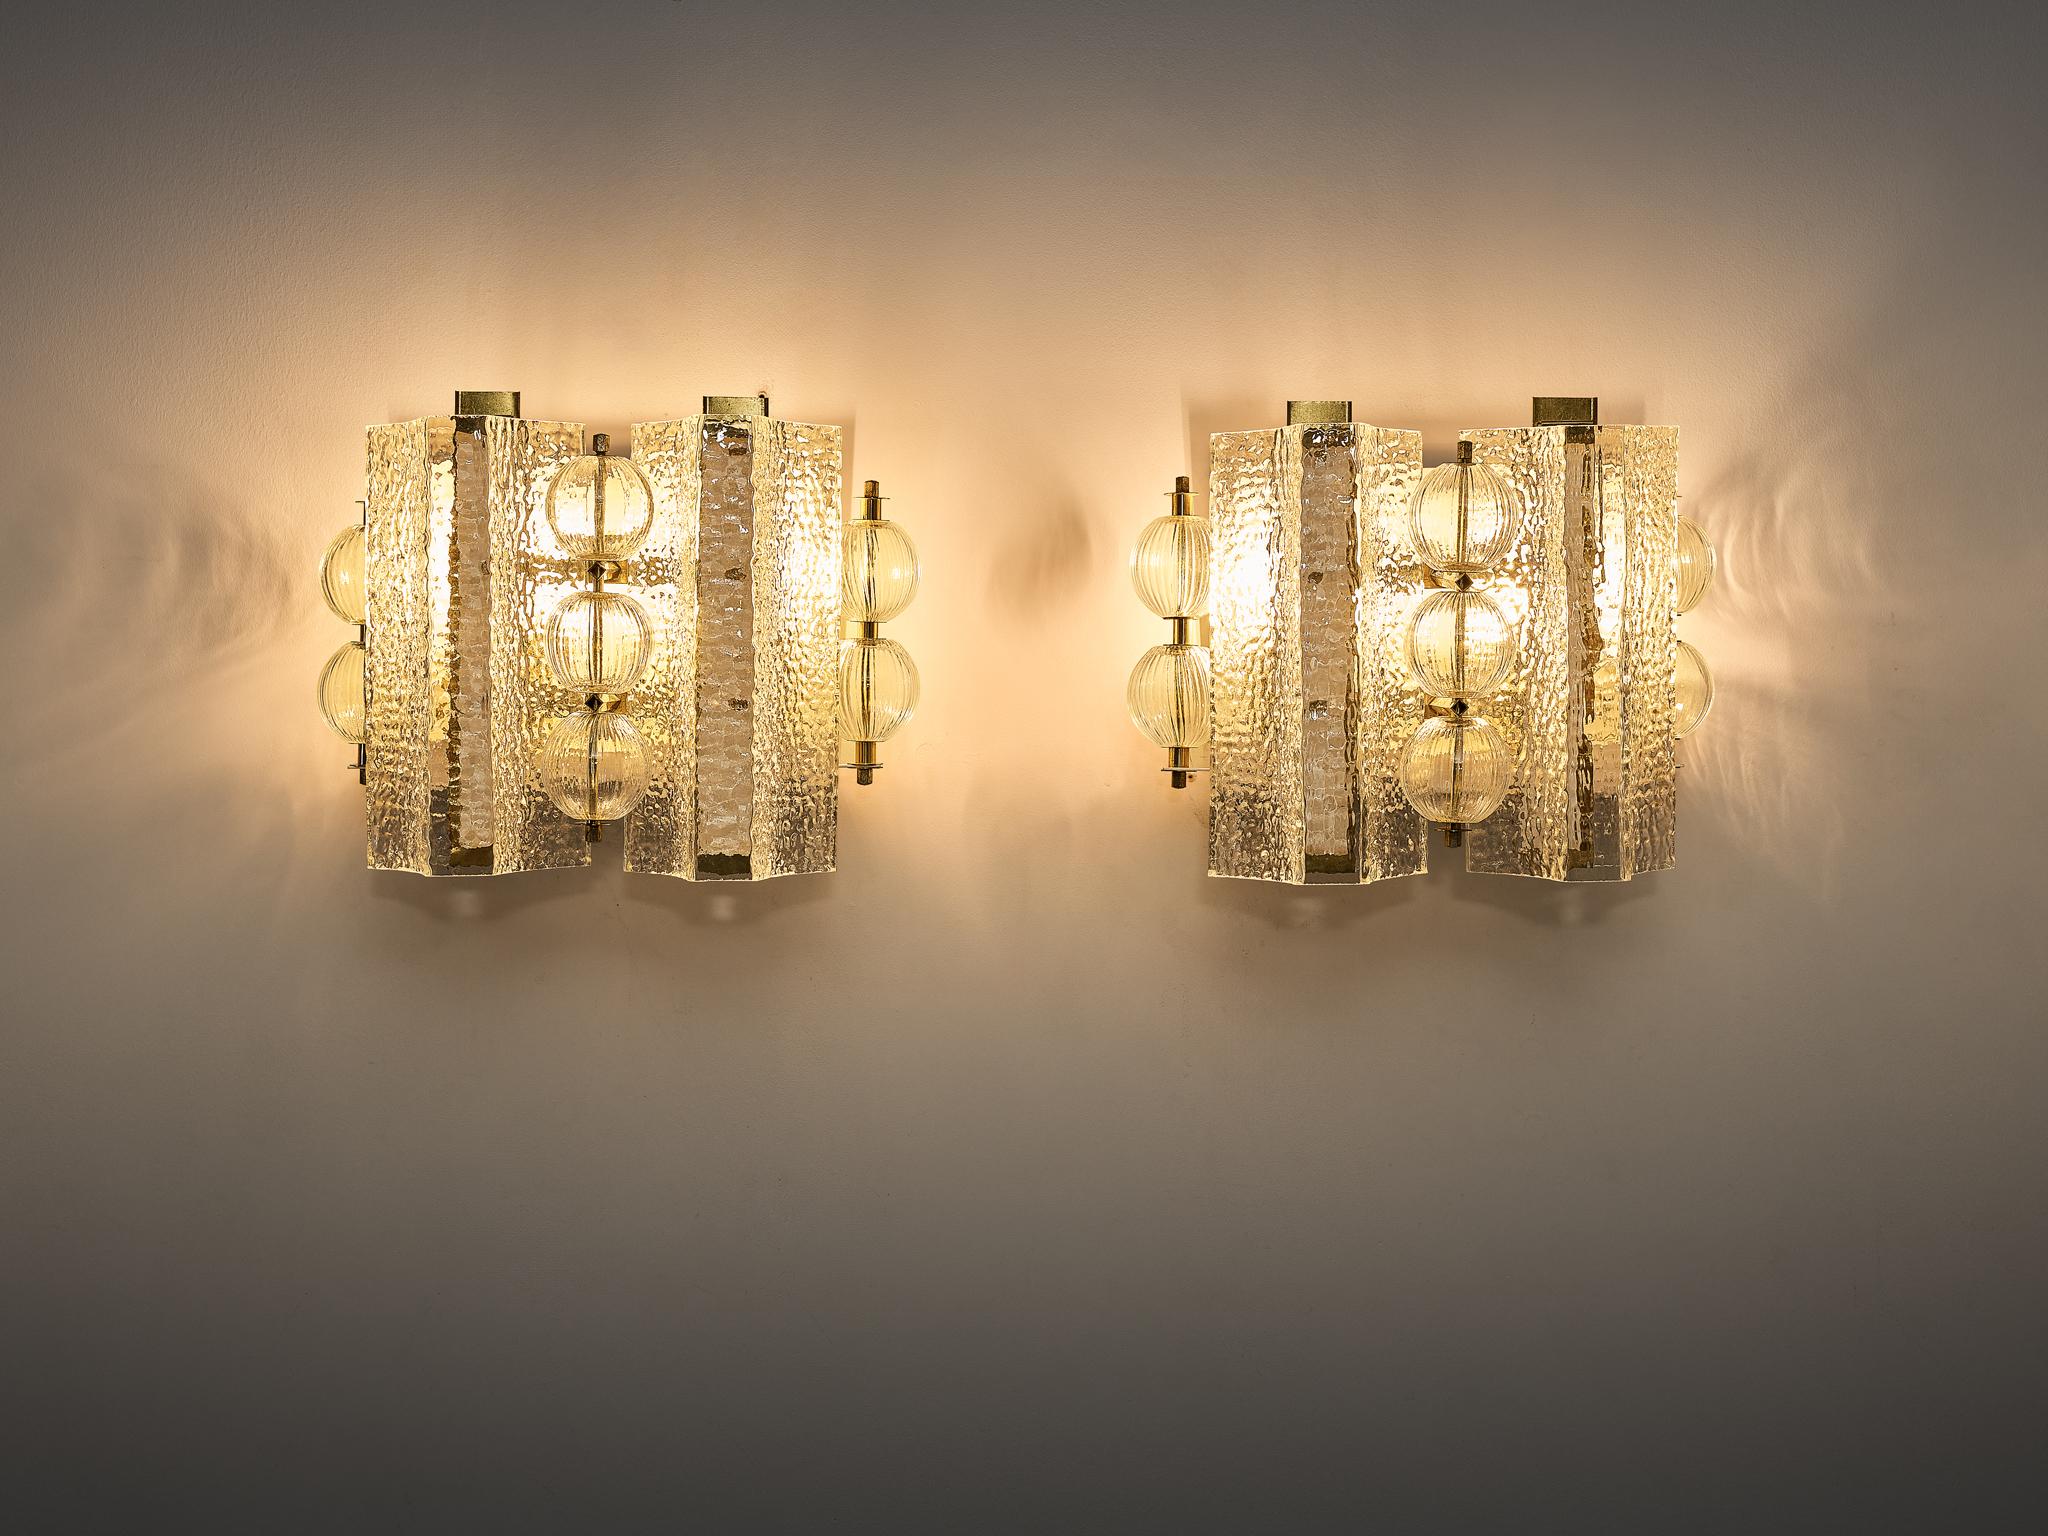 Wall light in glass and brass, Europe, 1970s.

Exquisite wall lights originating from Europe in the 1970s showcase a timeless blend of glass and brass craftsmanship. Featuring glass tubes and spheres alongside dual light points, each adorned with